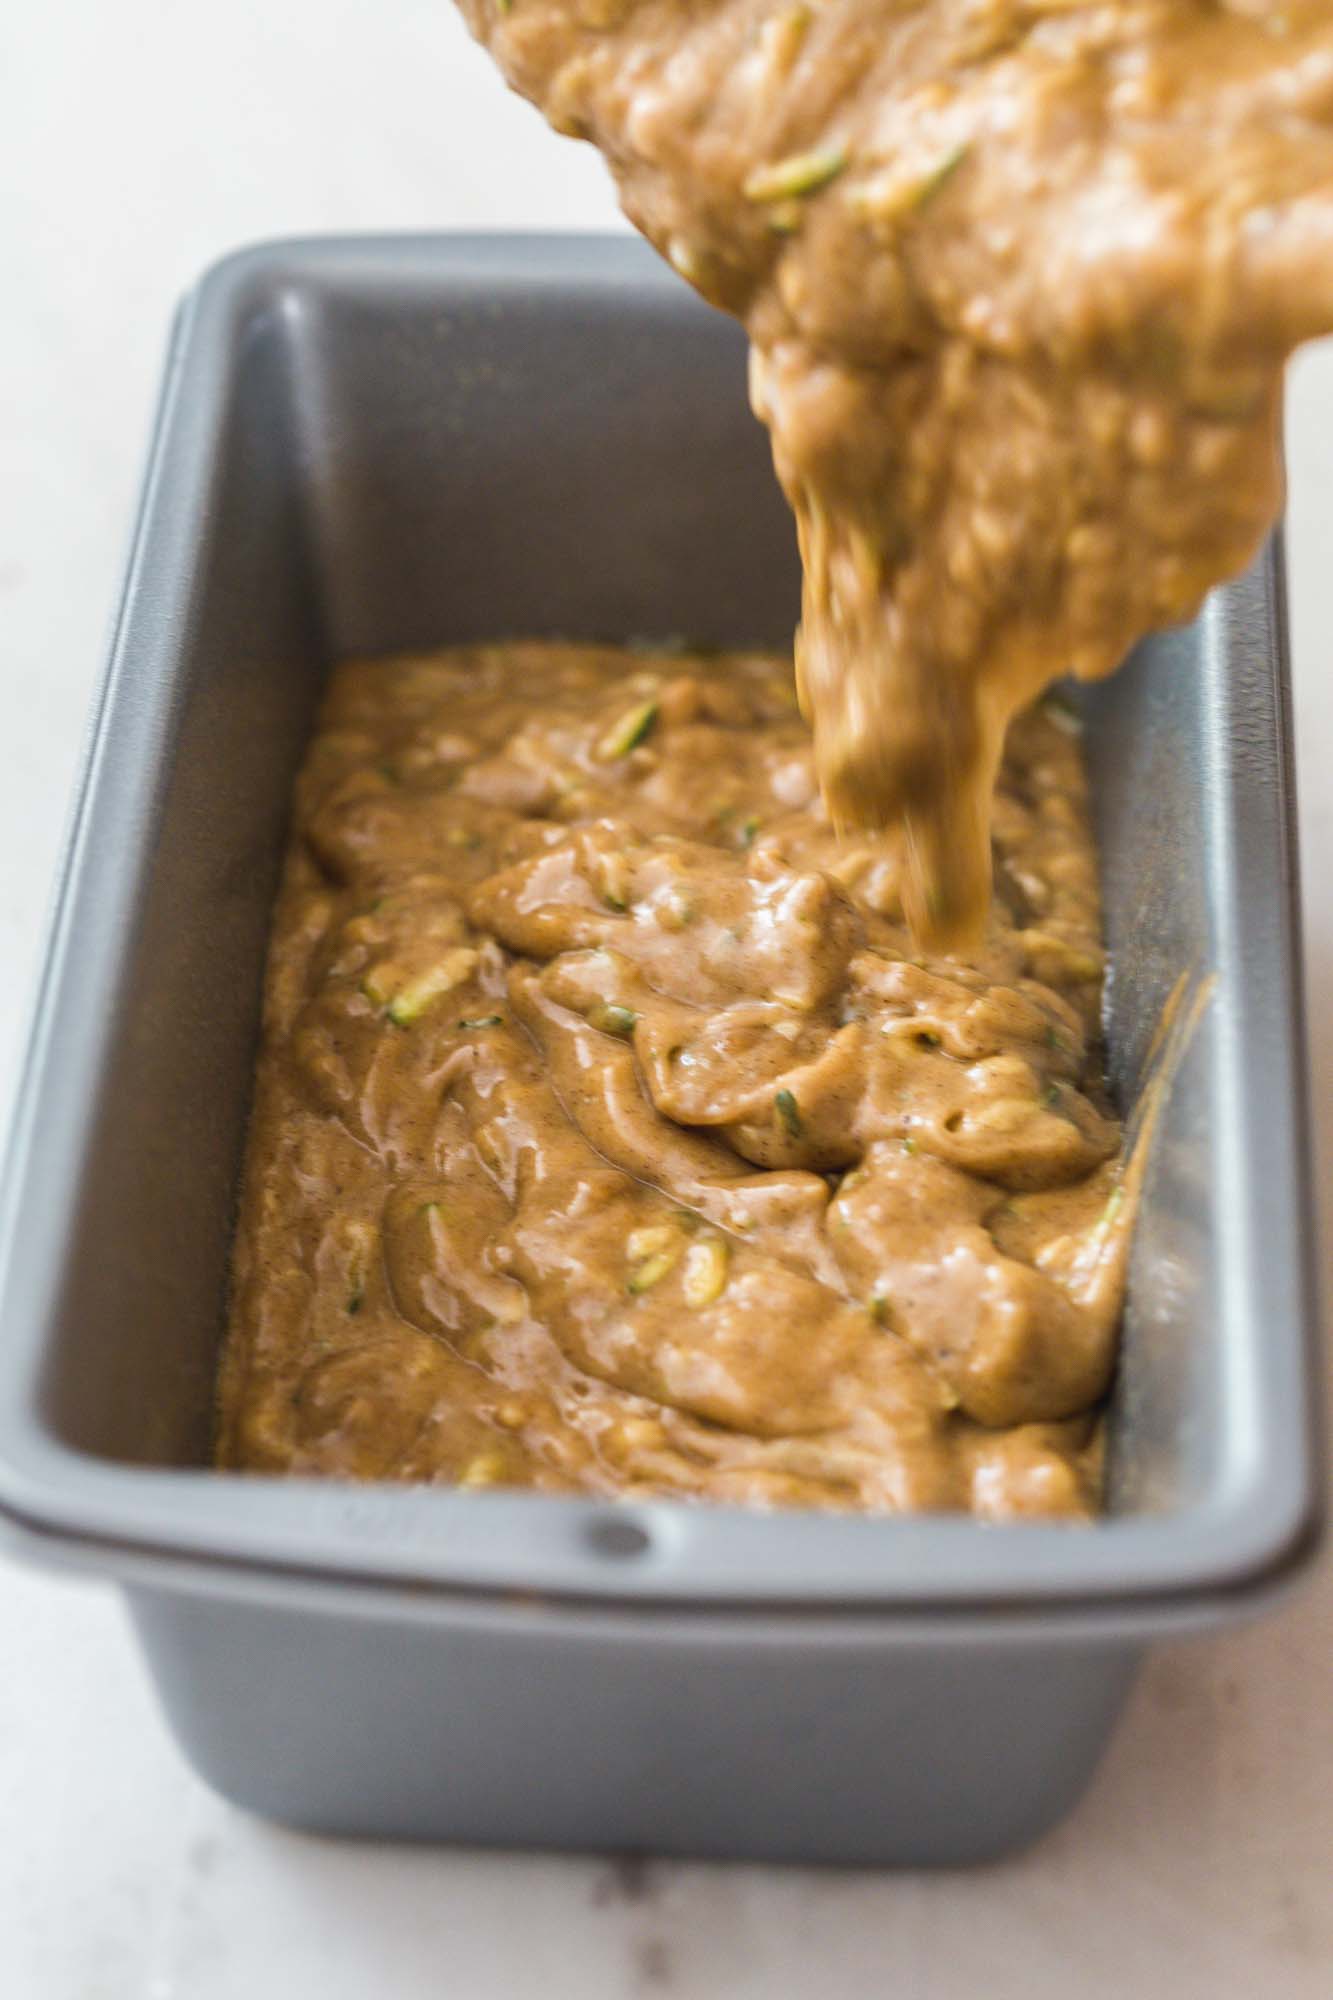 Pouring zucchini bread batter into a greased loaf pan